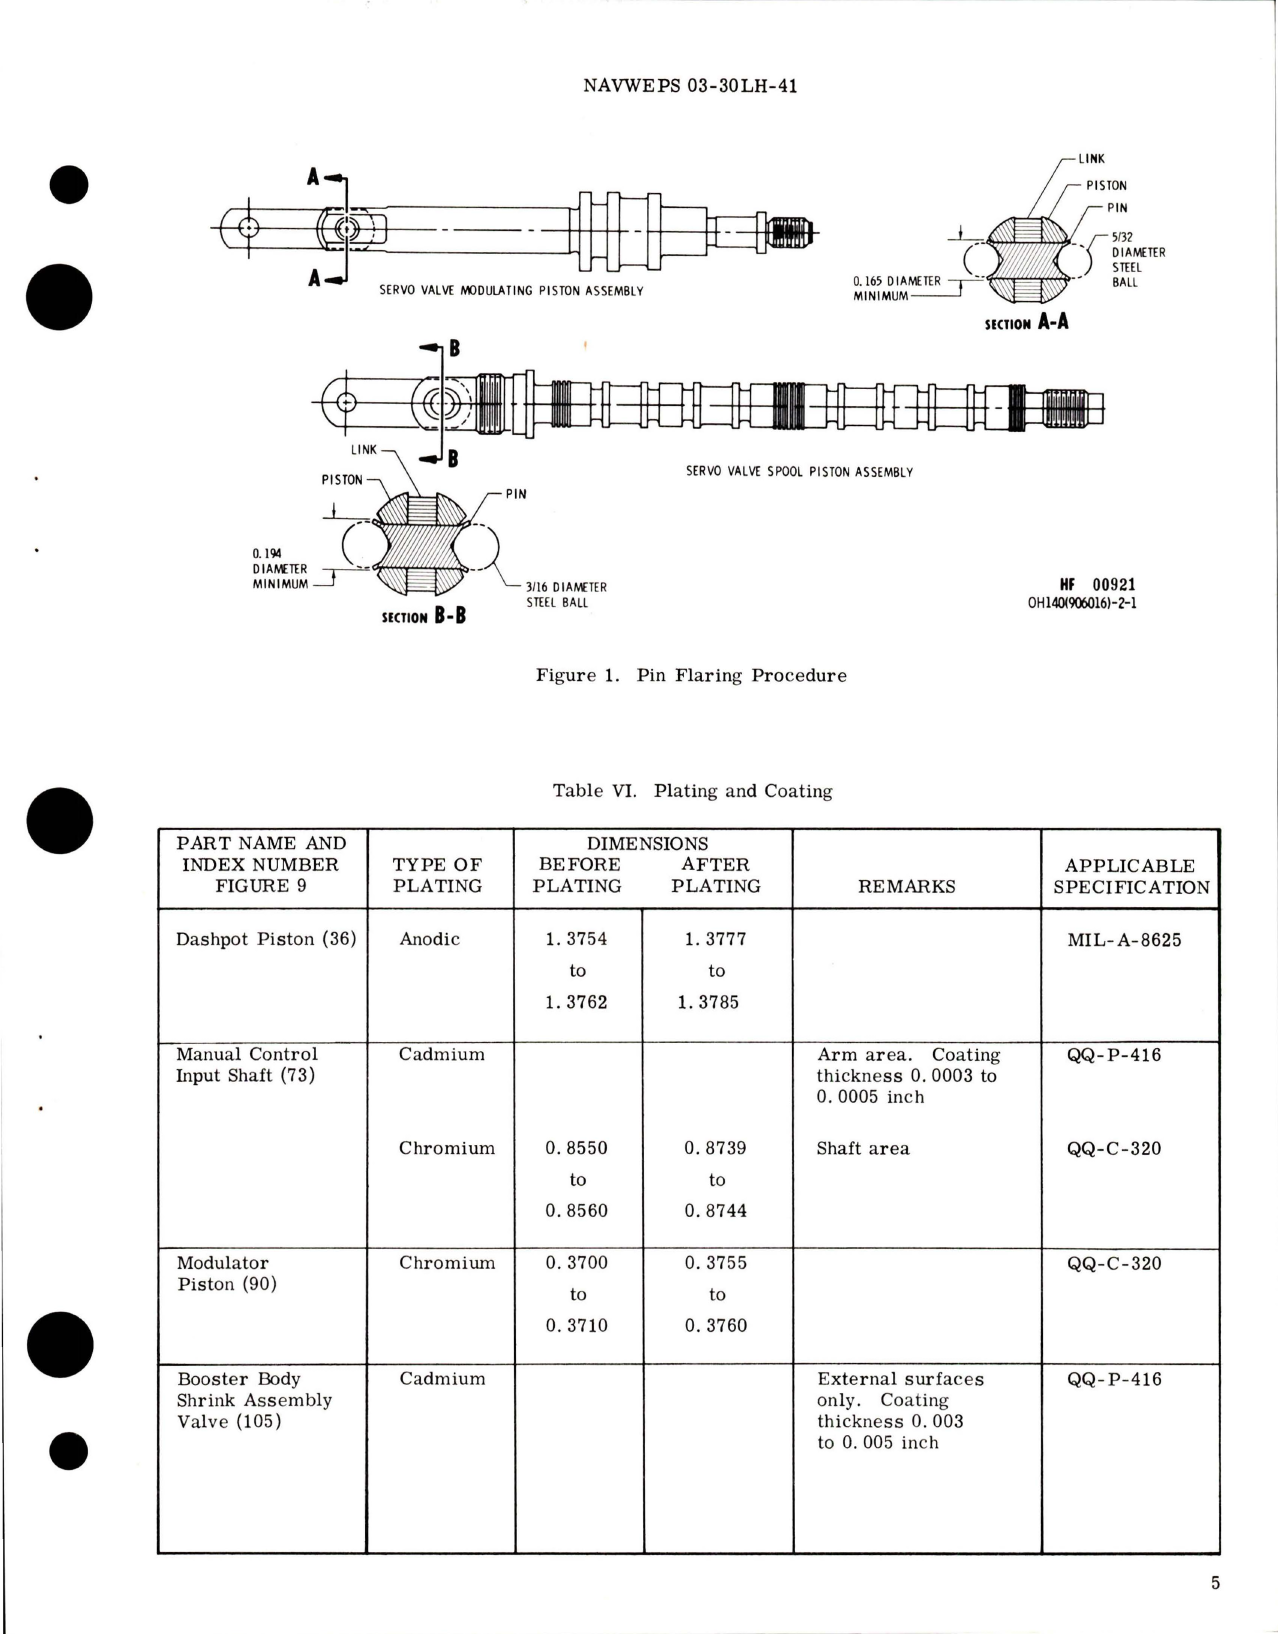 Sample page 7 from AirCorps Library document: Overhaul Instructions with Parts Breakdown for Hydraulic Booster Dual System Valve Assembly - Part 906016-101 